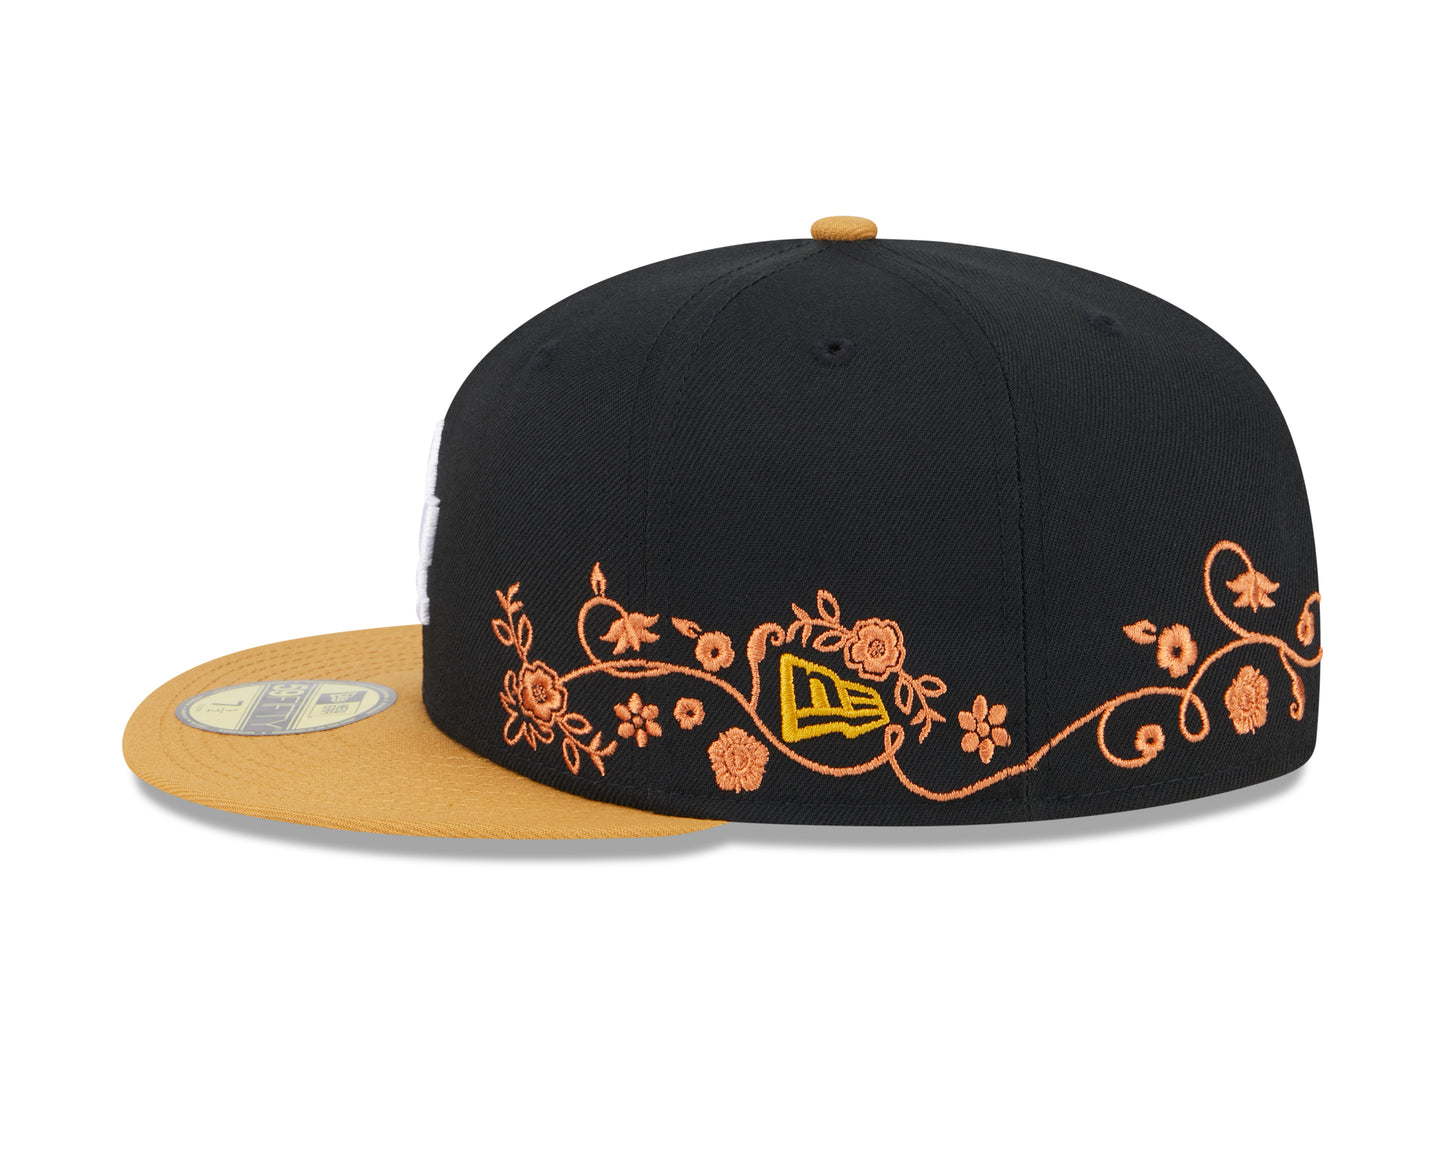 New Era - 59Fifty Fitted - FLORAL VINE - Los Angeles Dodgers - Black - Headz Up 